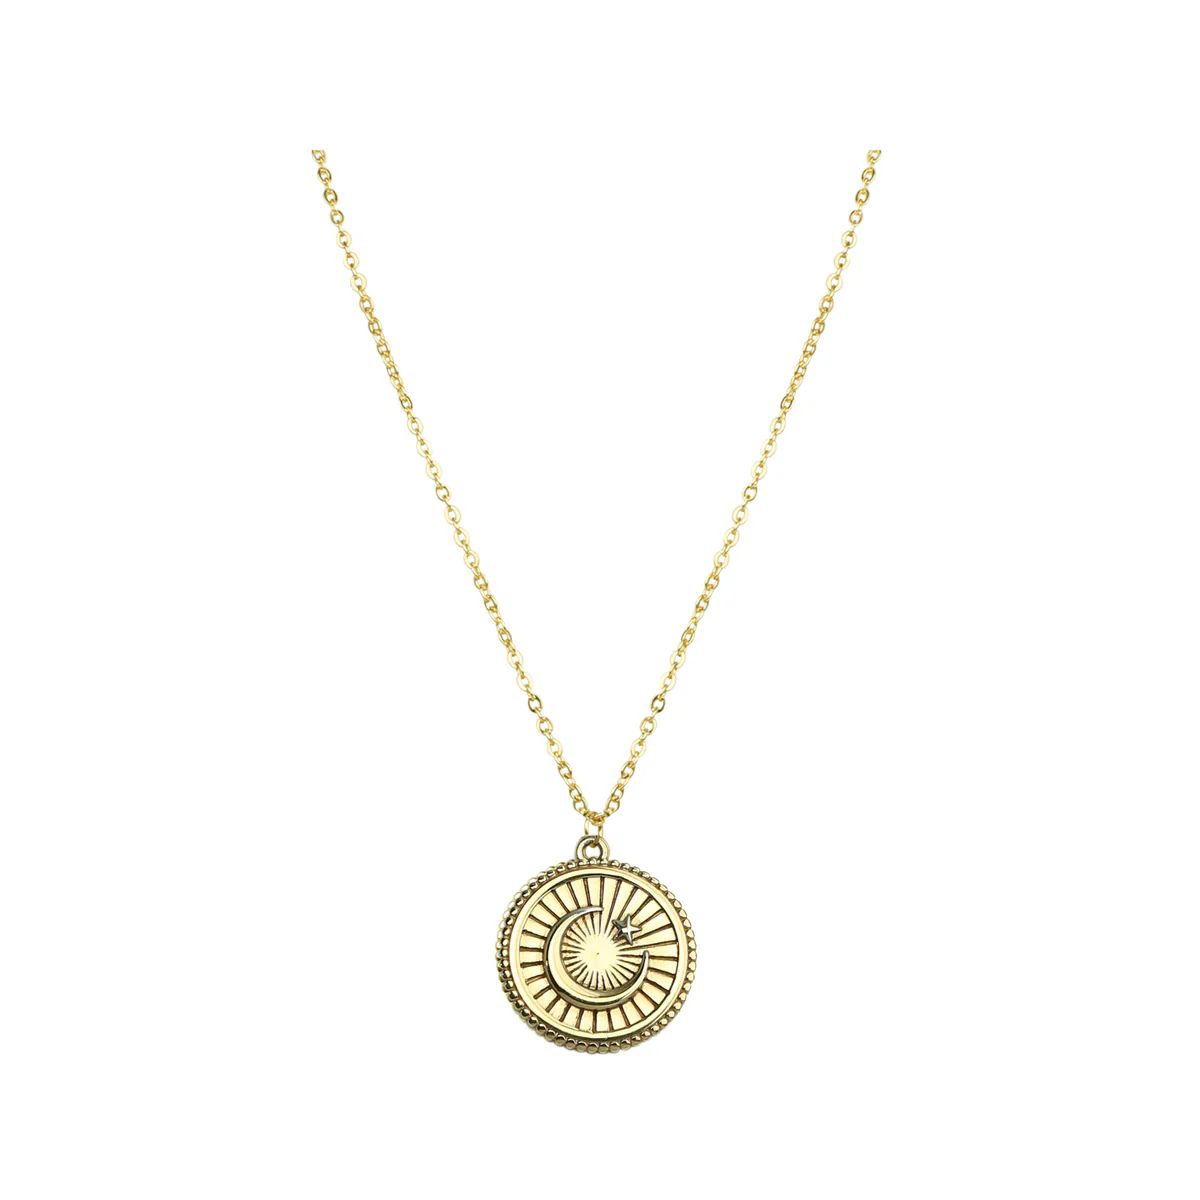 Moonstar Coin Necklace | Parpala Jewelry